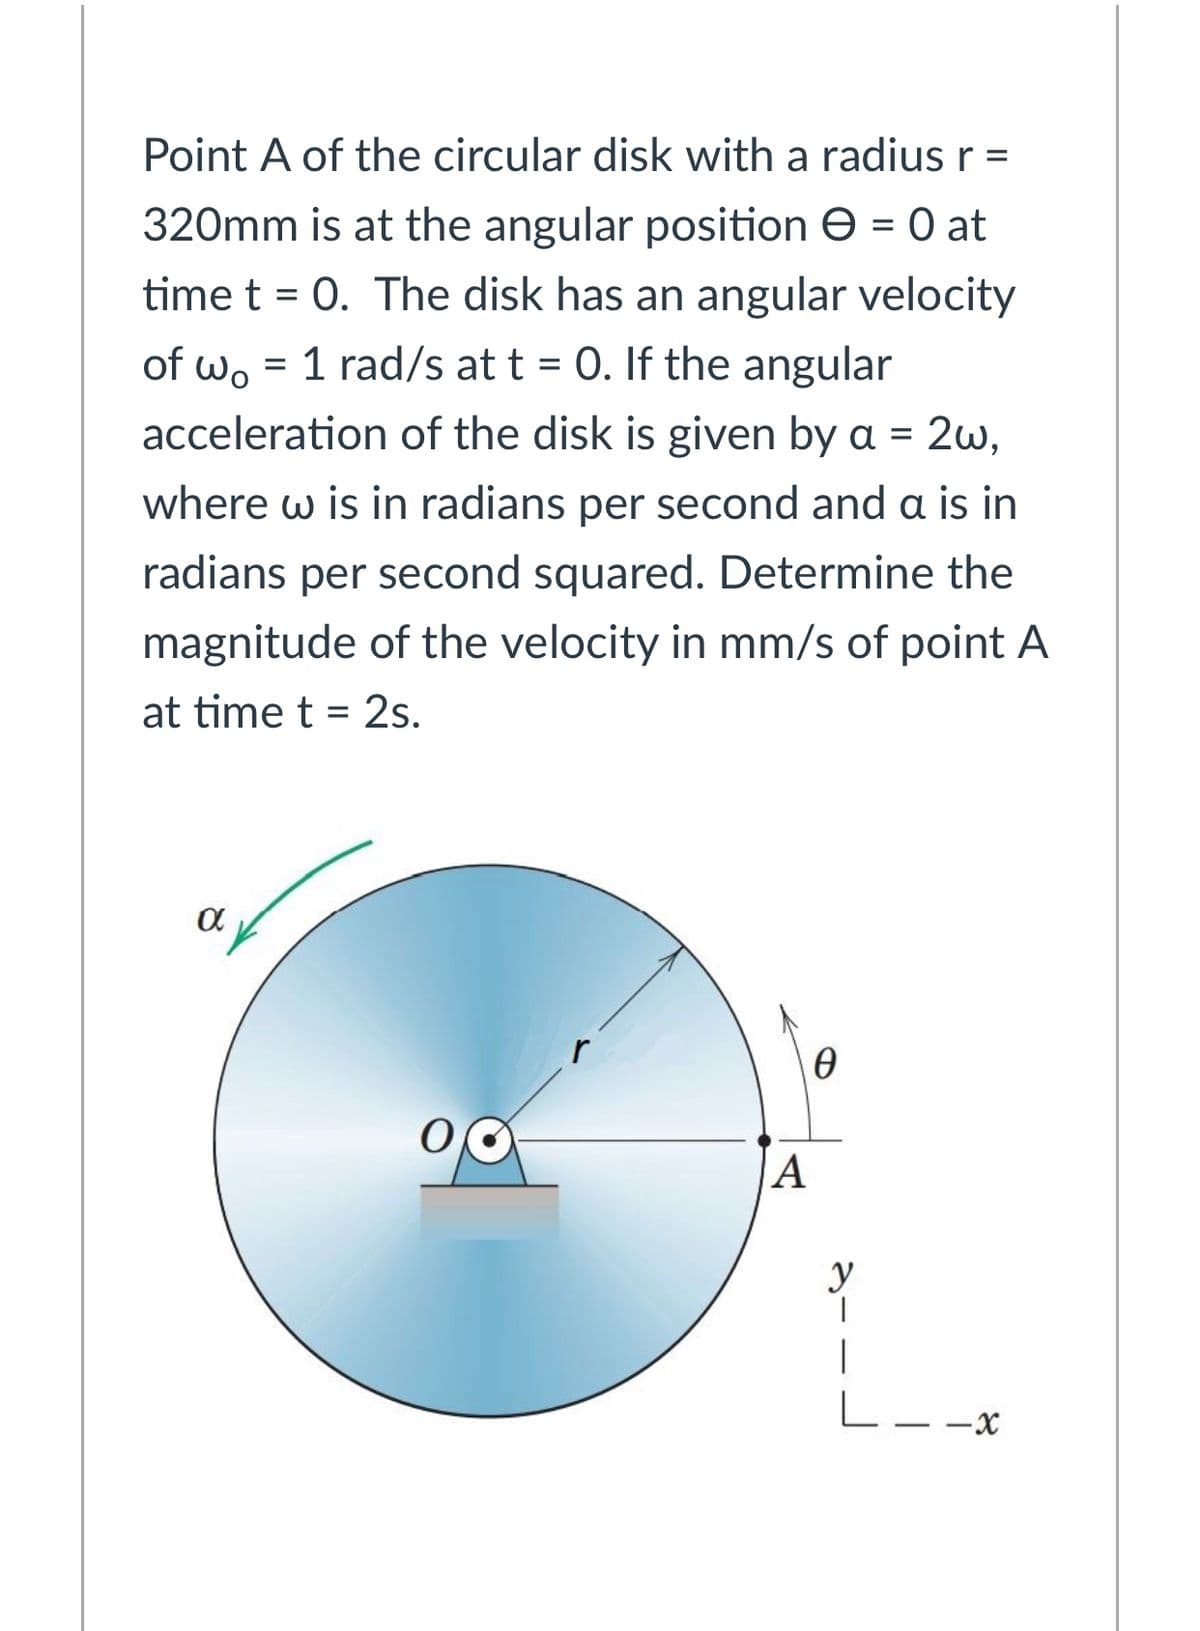 Point A of the circular disk with a radius r =
320mm is at the angular position e = 0 at
time t = 0. The disk has an angular velocity
of wo = 1 rad/s at t = 0. If the angular
acceleration of the disk is given by a = 2w,
where w is in radians per second and a is in
radians per second squared. Determine the
magnitude of the velocity in mm/s of point A
at time t = 2s.
A
y
|
L--x
